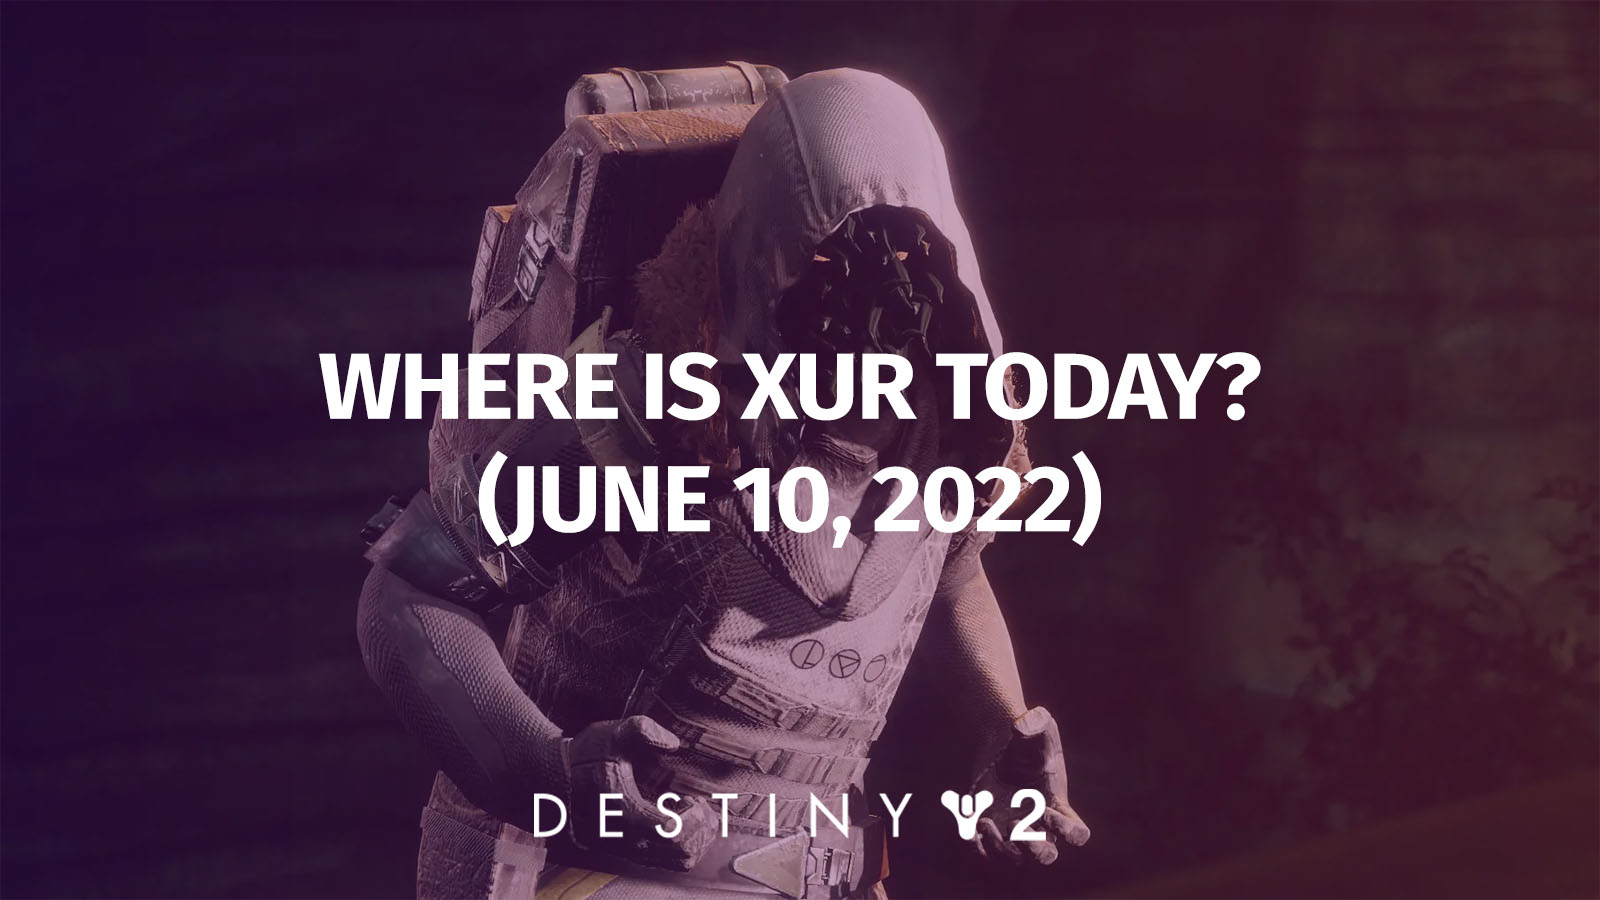 Destiny 2: Where is Xur Today? Exotic Inventory June 10, 2022